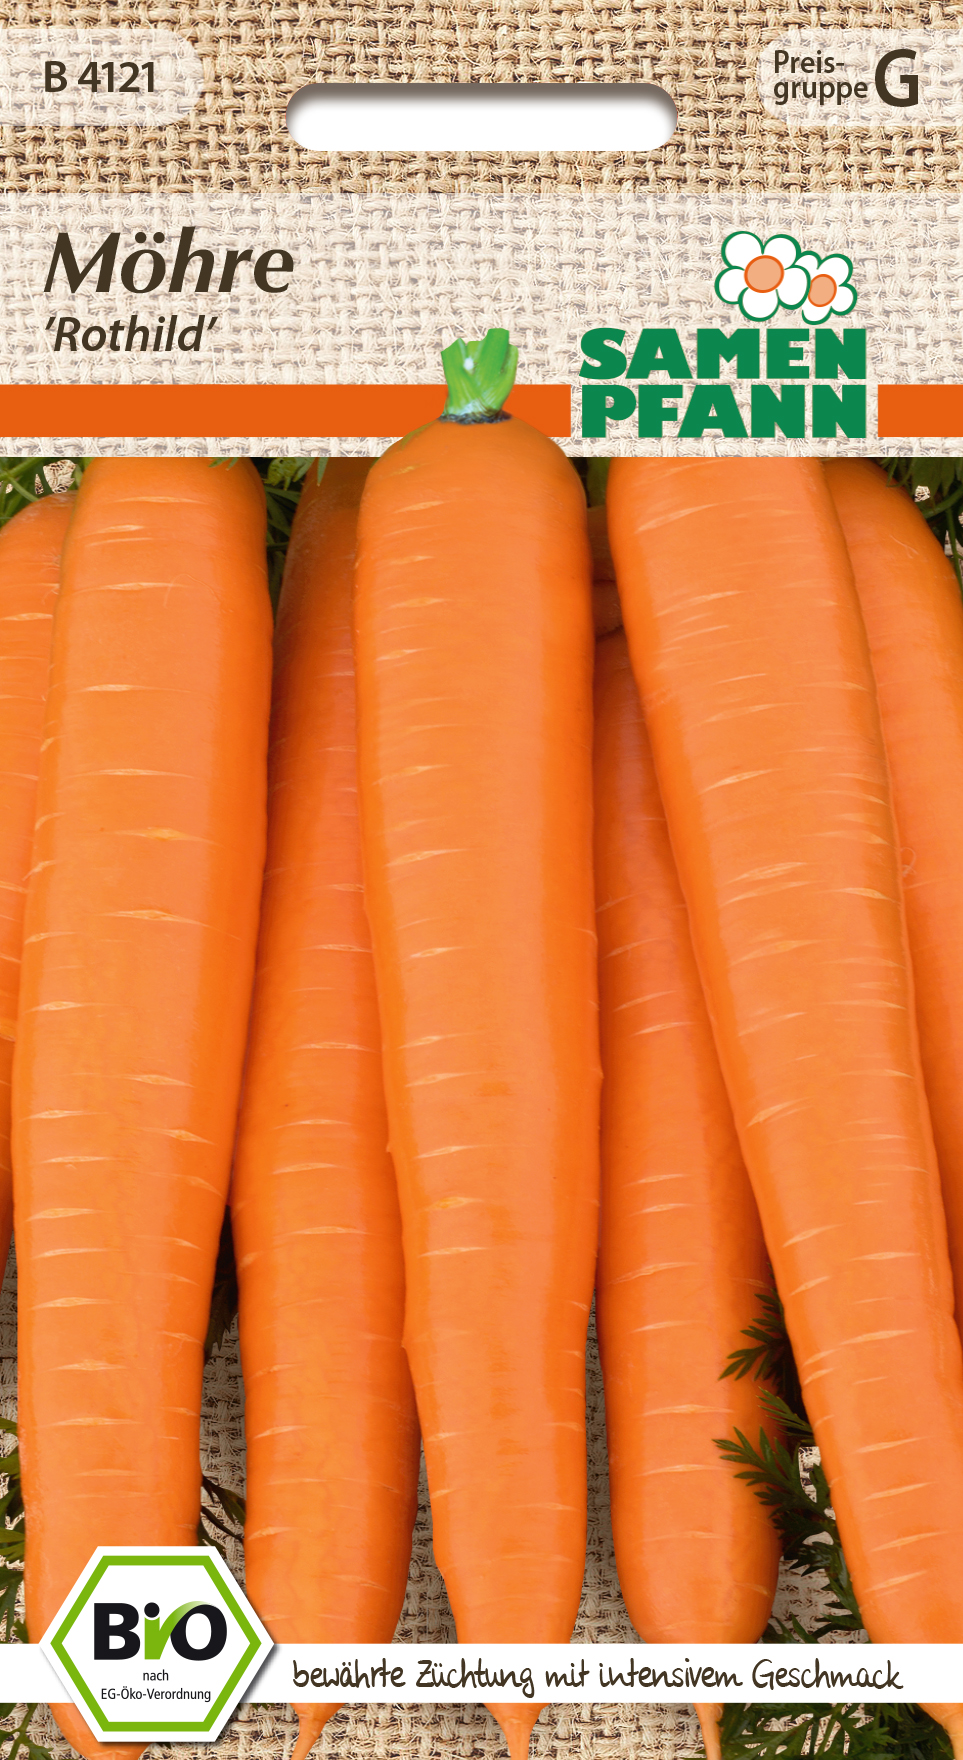 Carrot Organic Rothild about 1000 seeds seeds Pfann